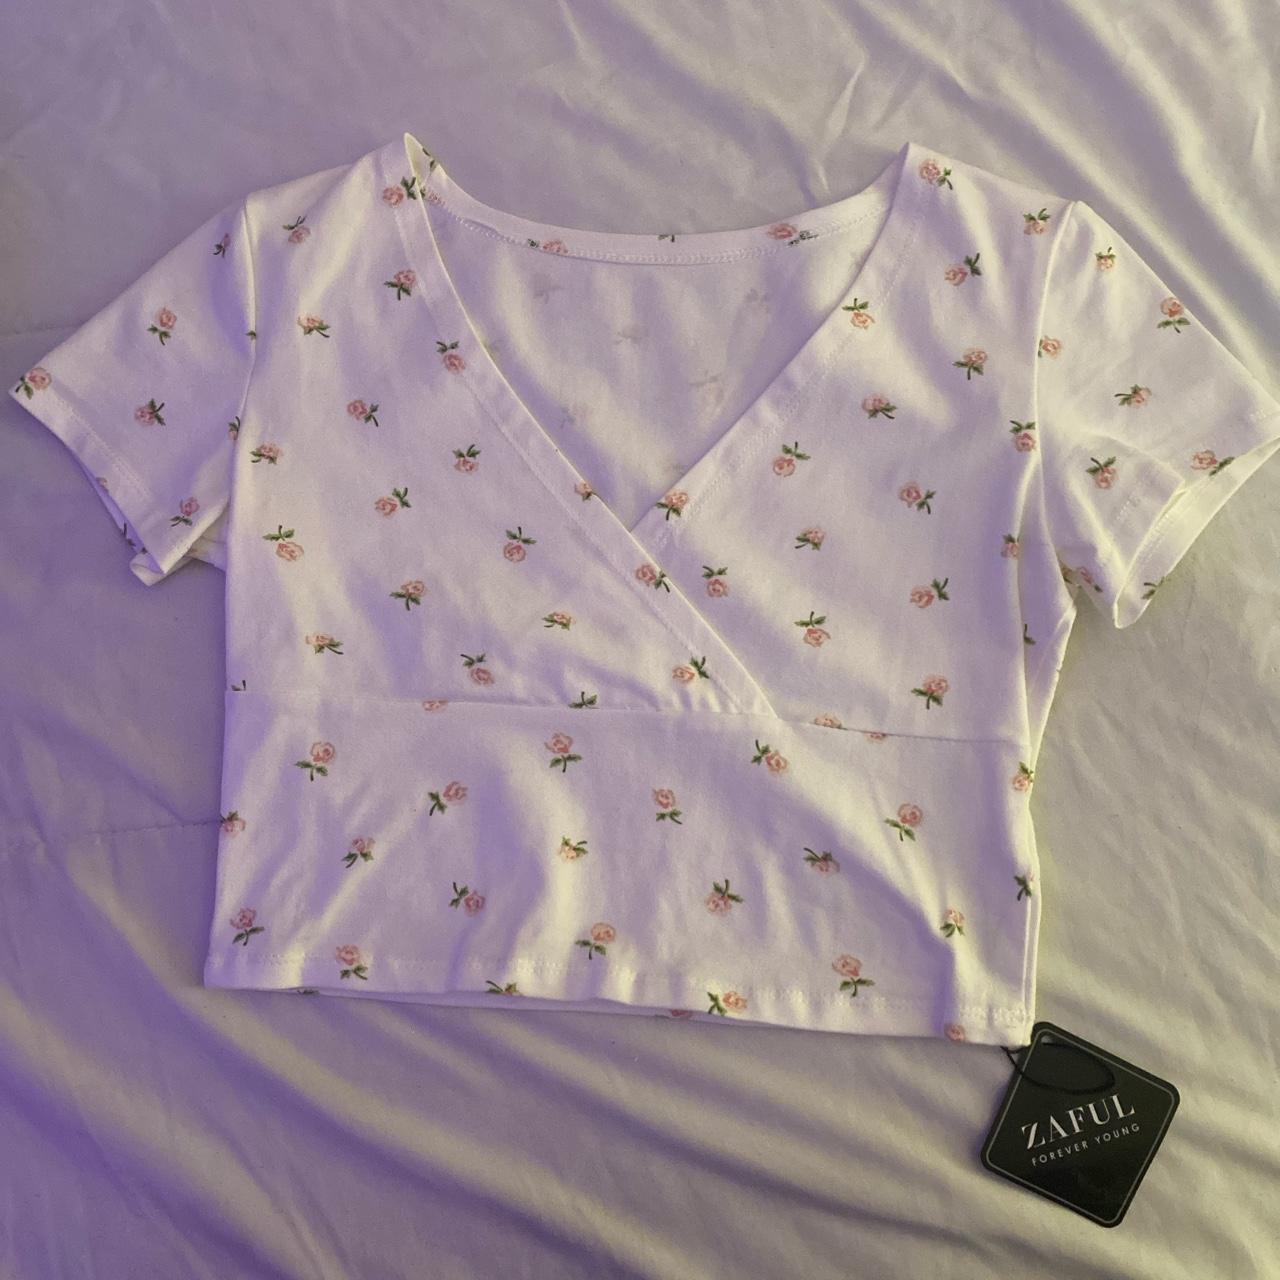 ZAFUL Women's White and Pink Crop-top